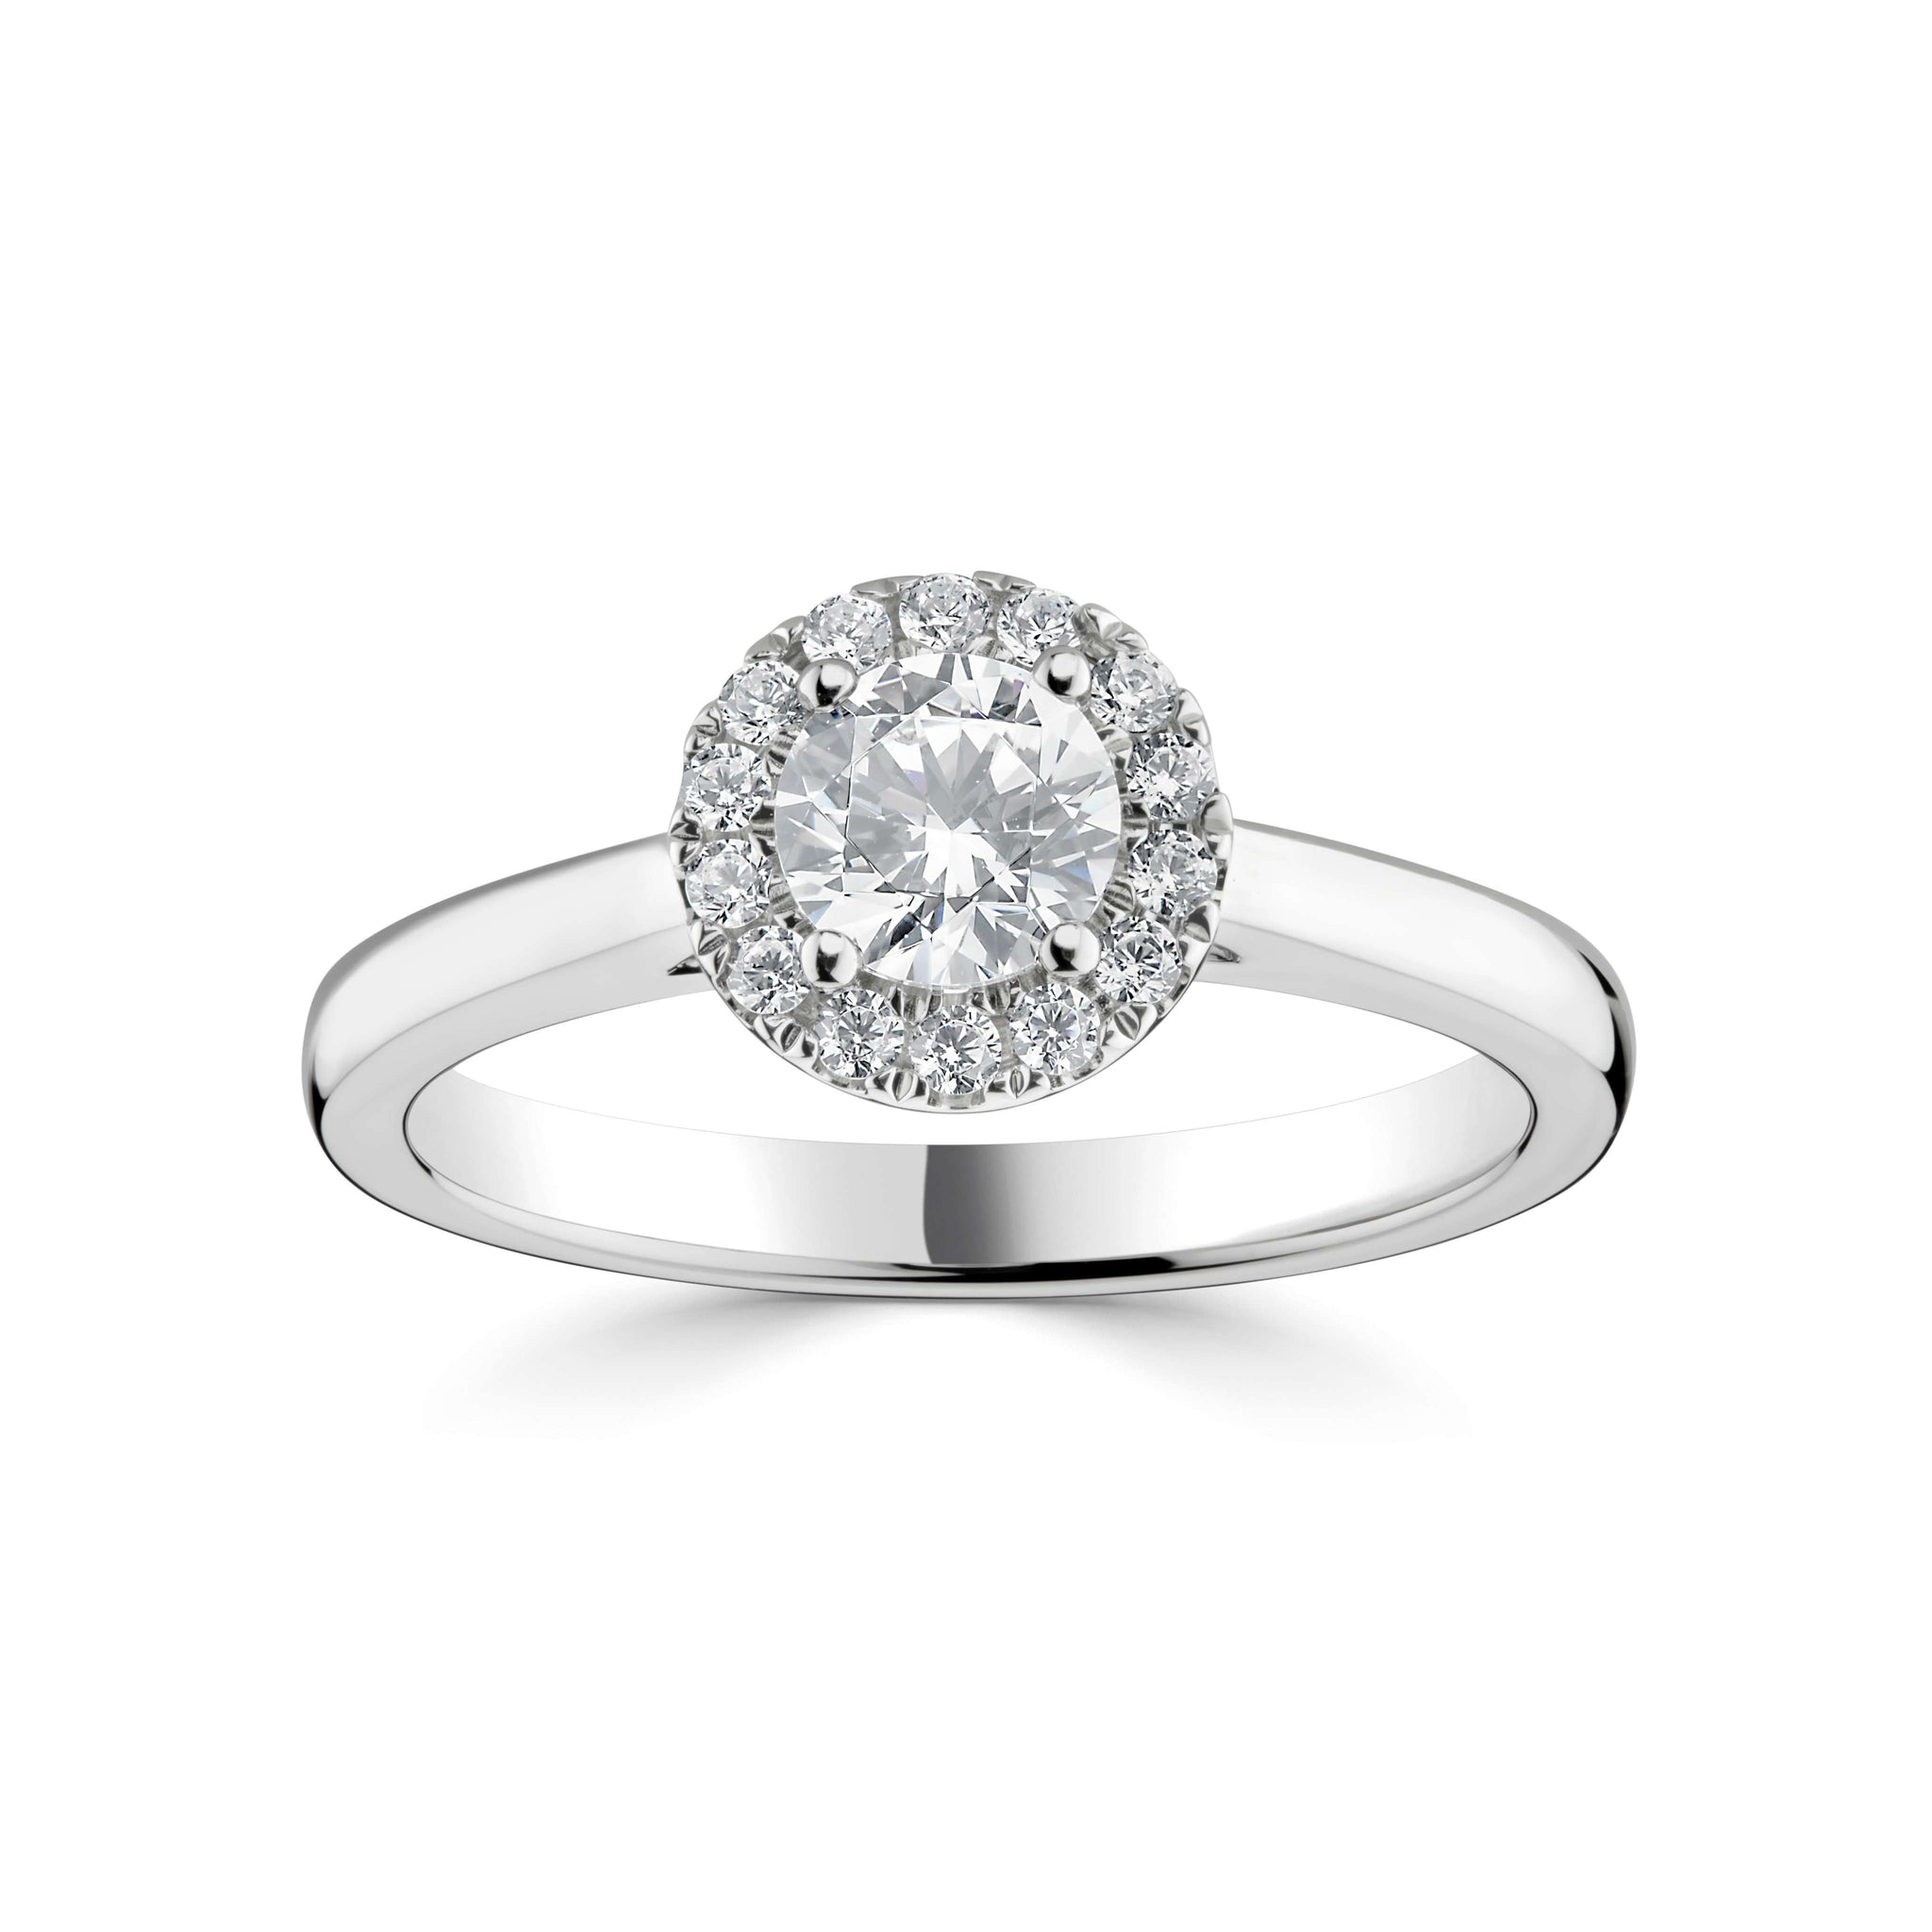 Kyla *Select a Round Diamond 0.25ct or above